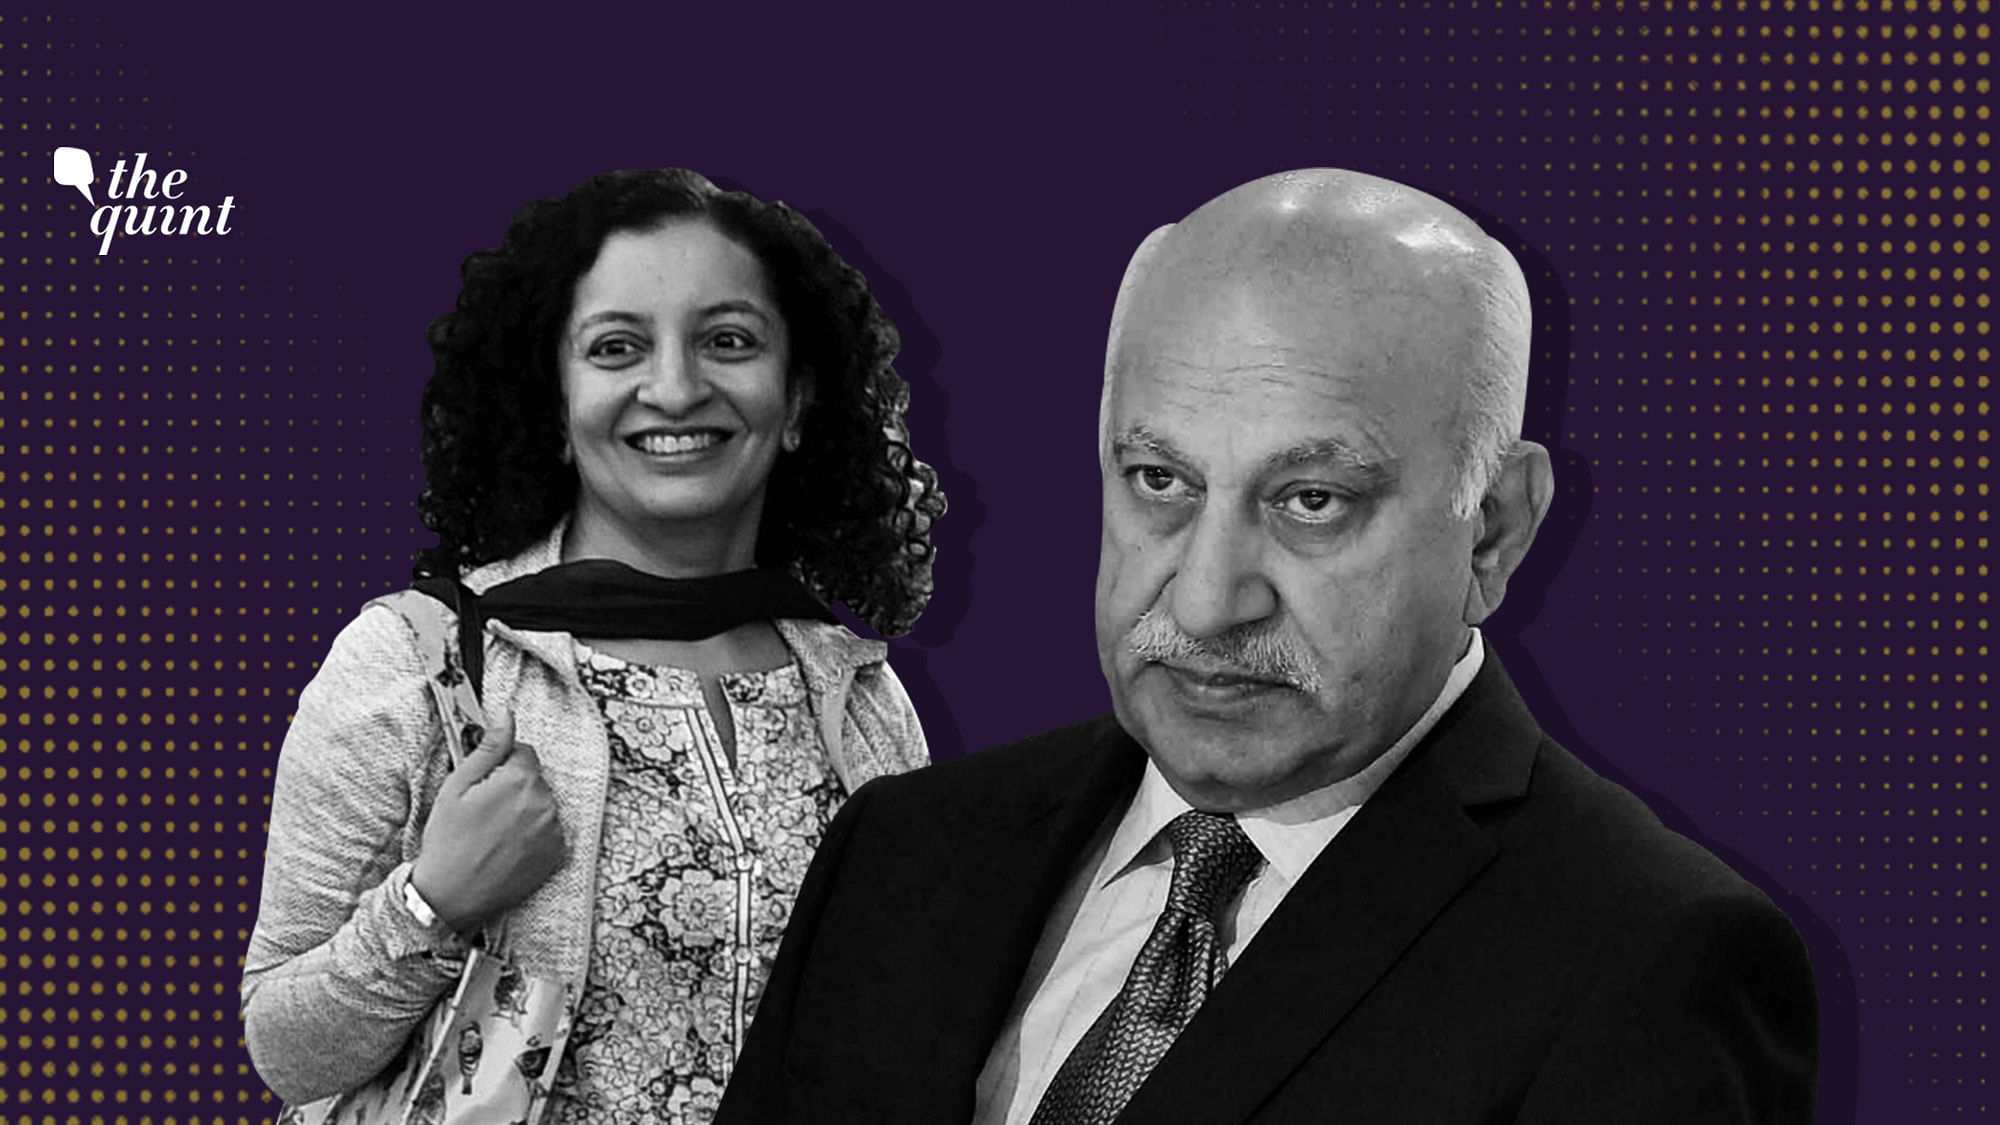 A Delhi court is set to pronounce its order in the criminal defamation case (Section 499 of the Indian Penal Code) brought on against journalist Priya Ramani by former Union Minister MJ Akbar on Wednesday, 16 February.